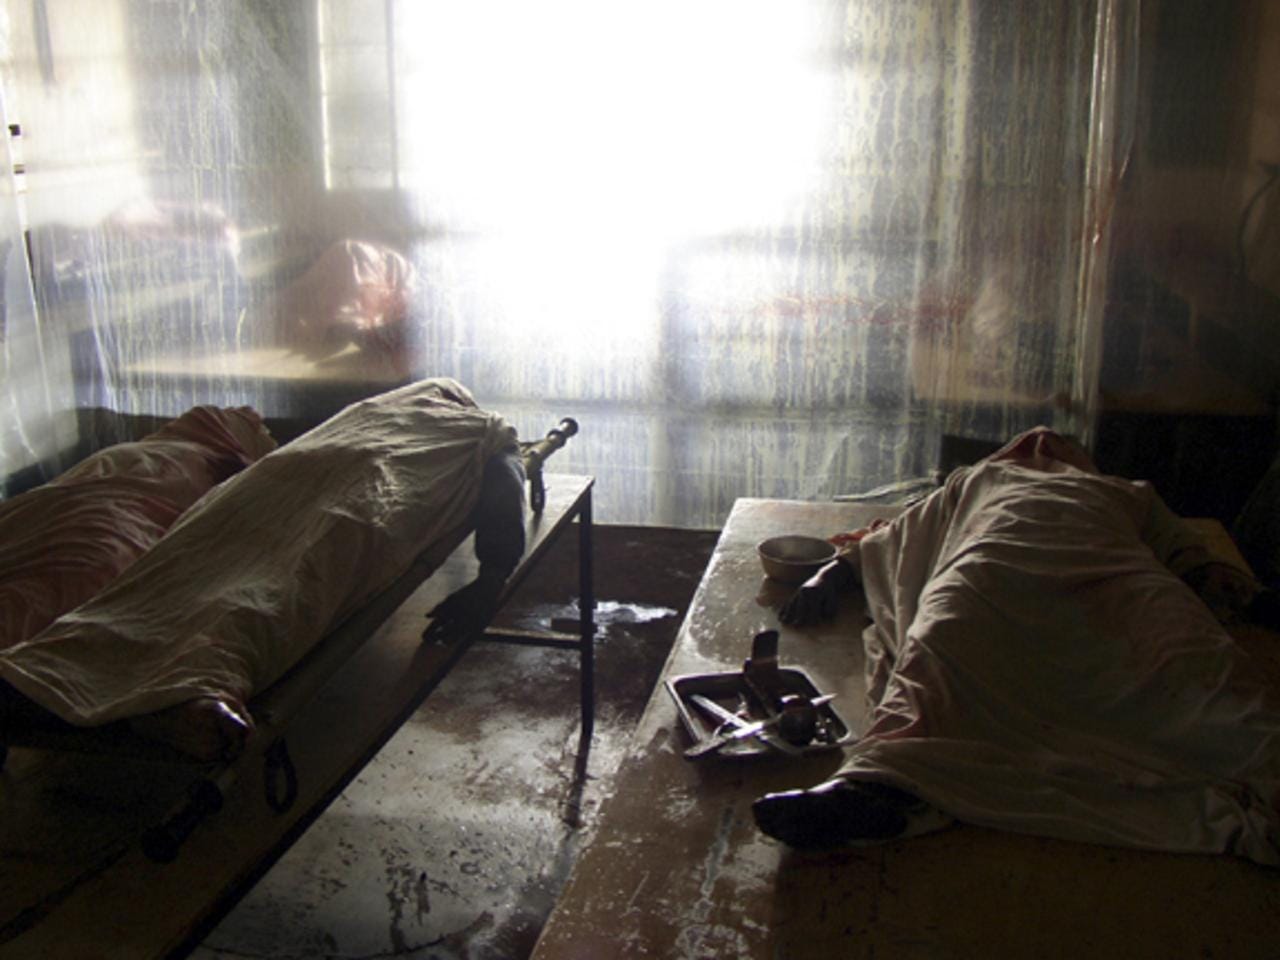 A scene from a Kigali morgue in Roger Spottiswoode's film &quot;Shake Hands with the Devil.&quot;